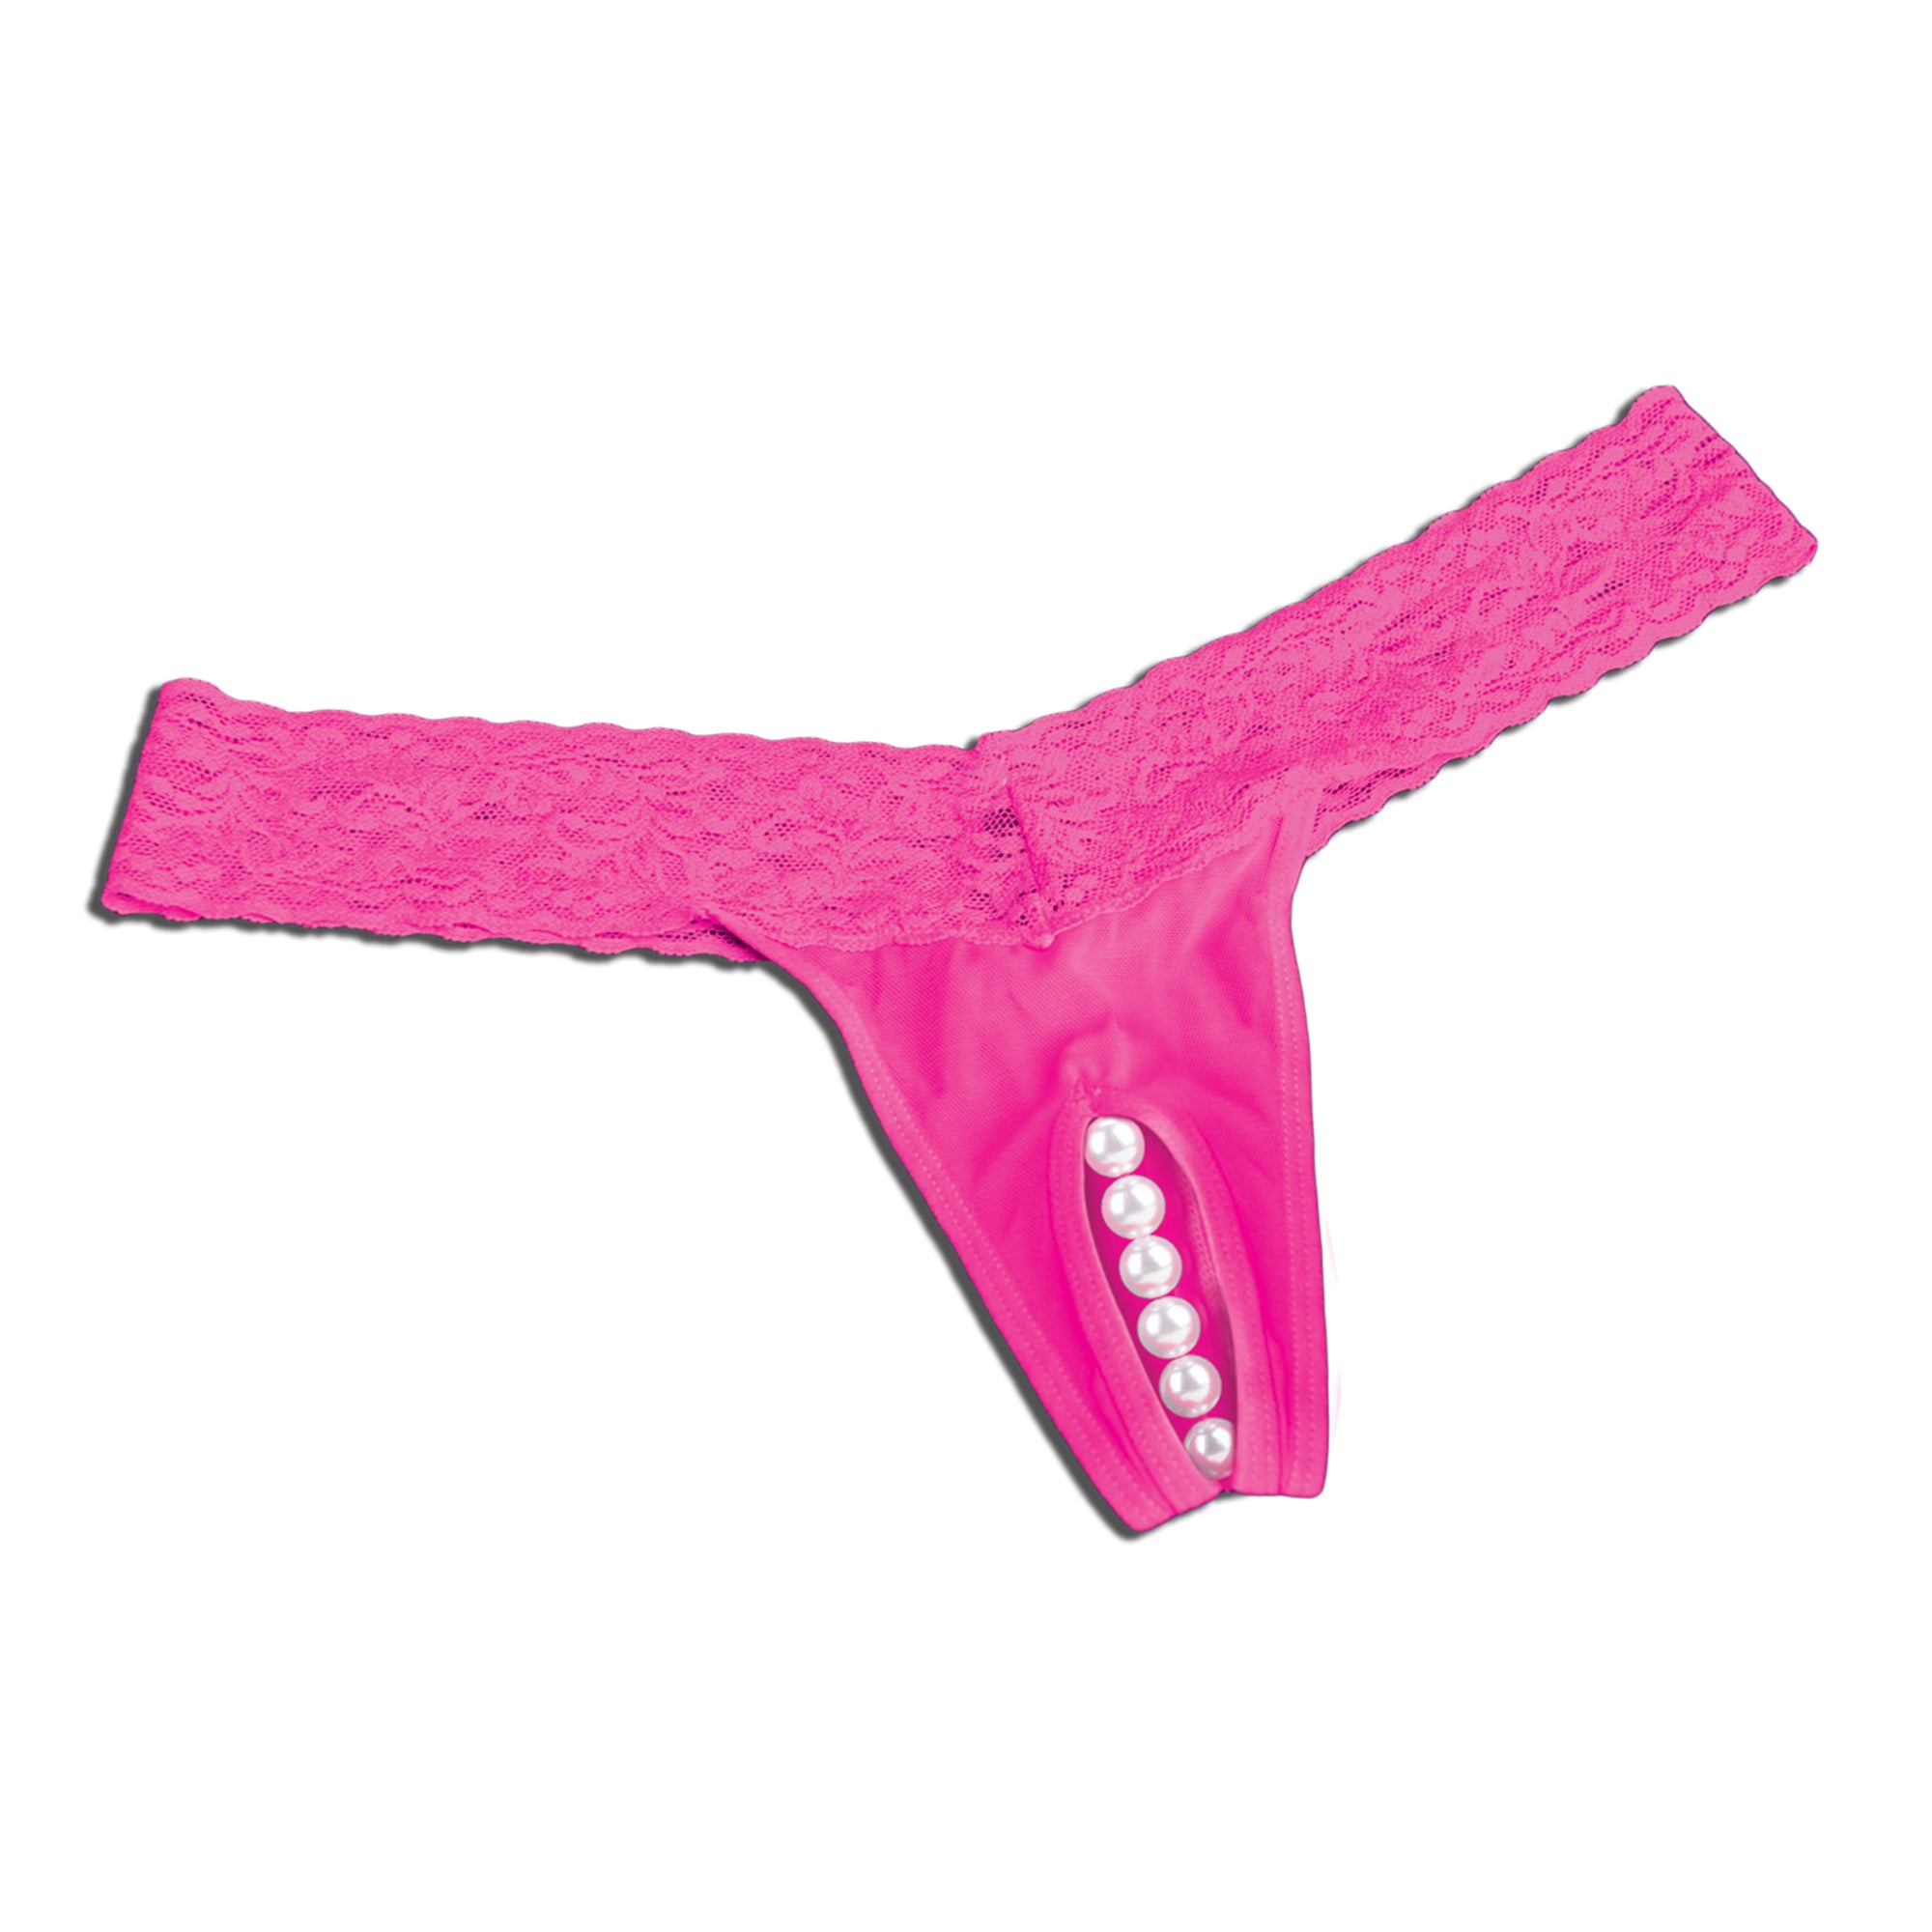 Crotchless Stimulating Panties With Pearl Pleasure Beads - Hot Pink